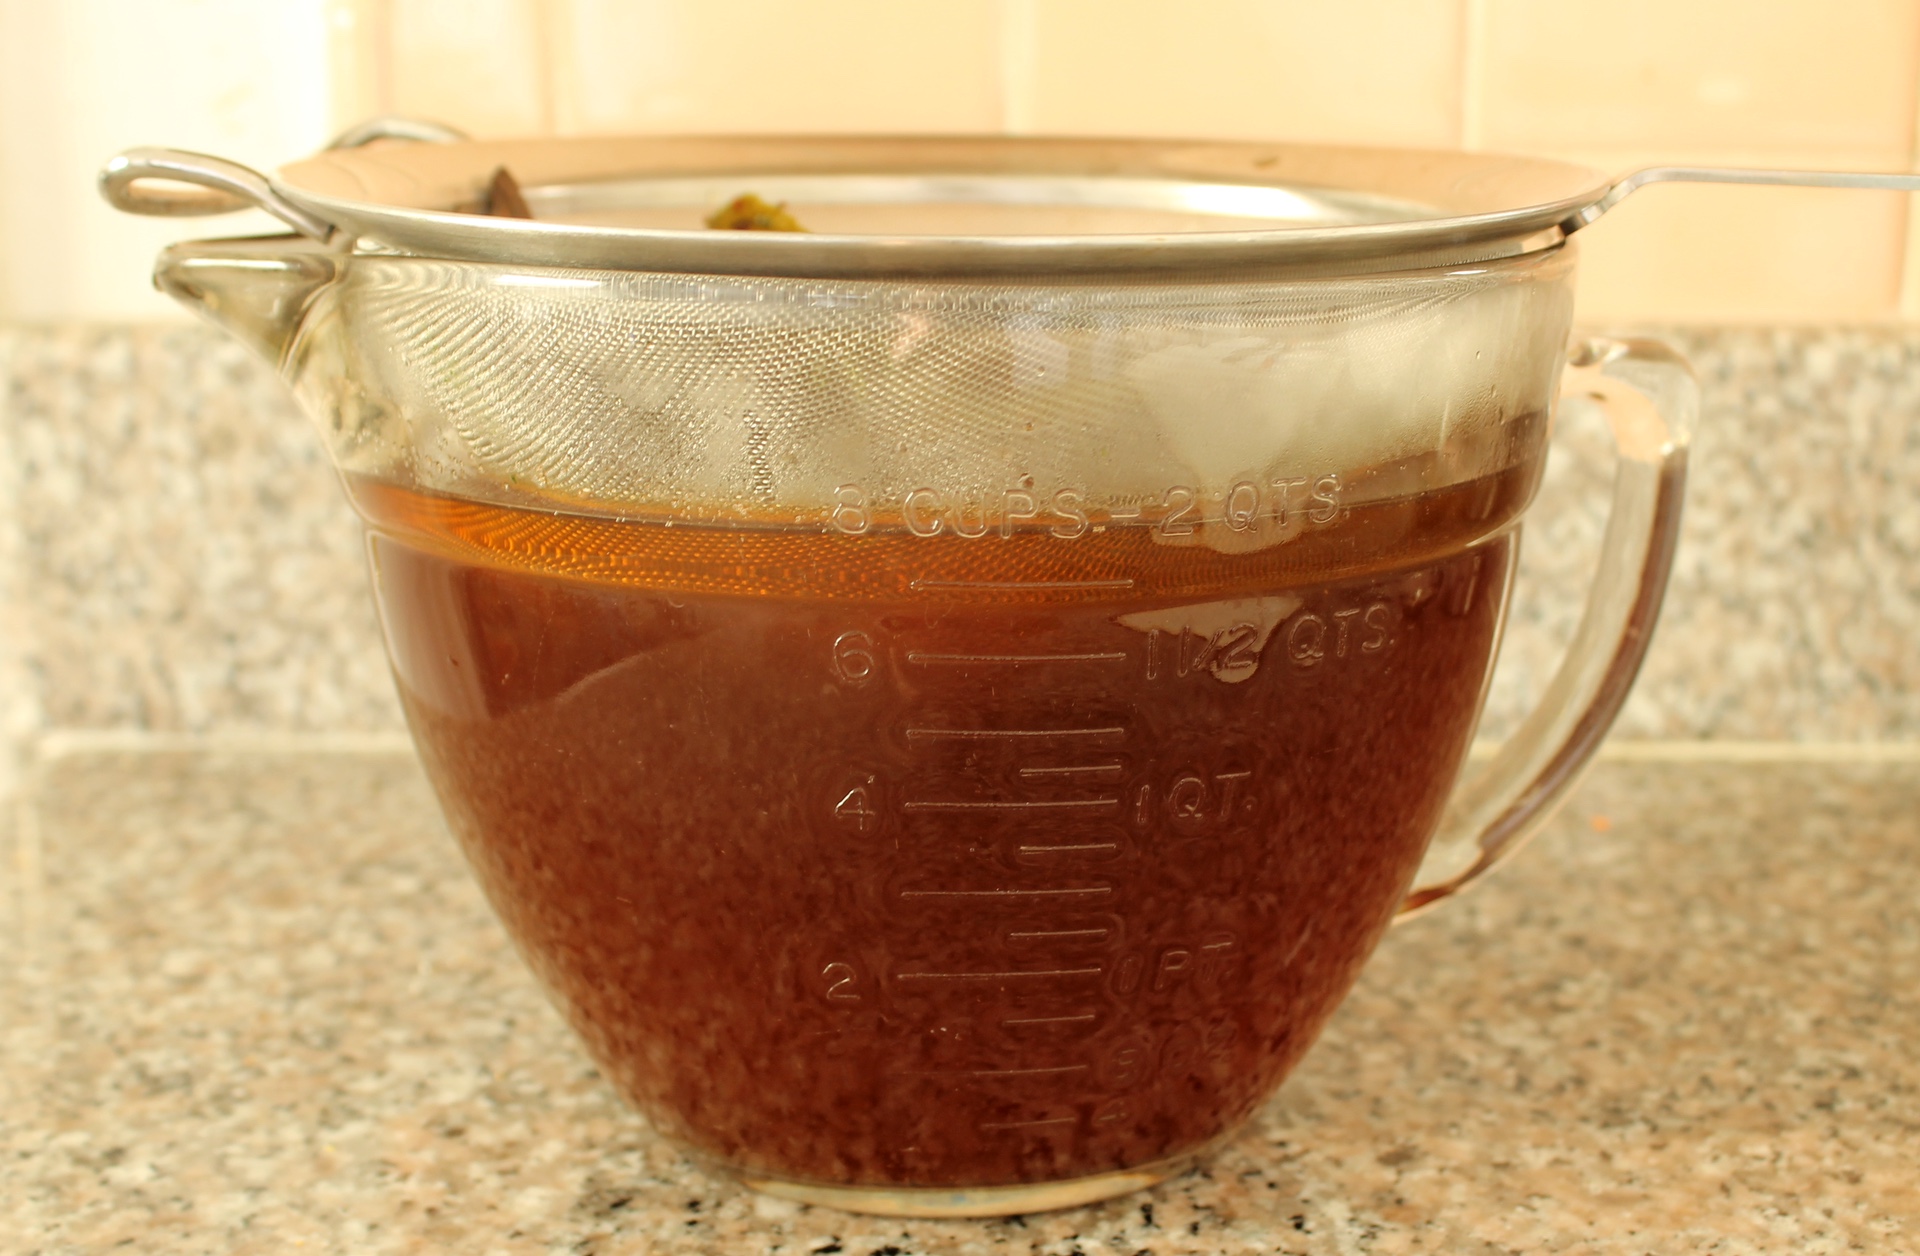 After two hours of steeping, the water is now deeply colored and aromatic.